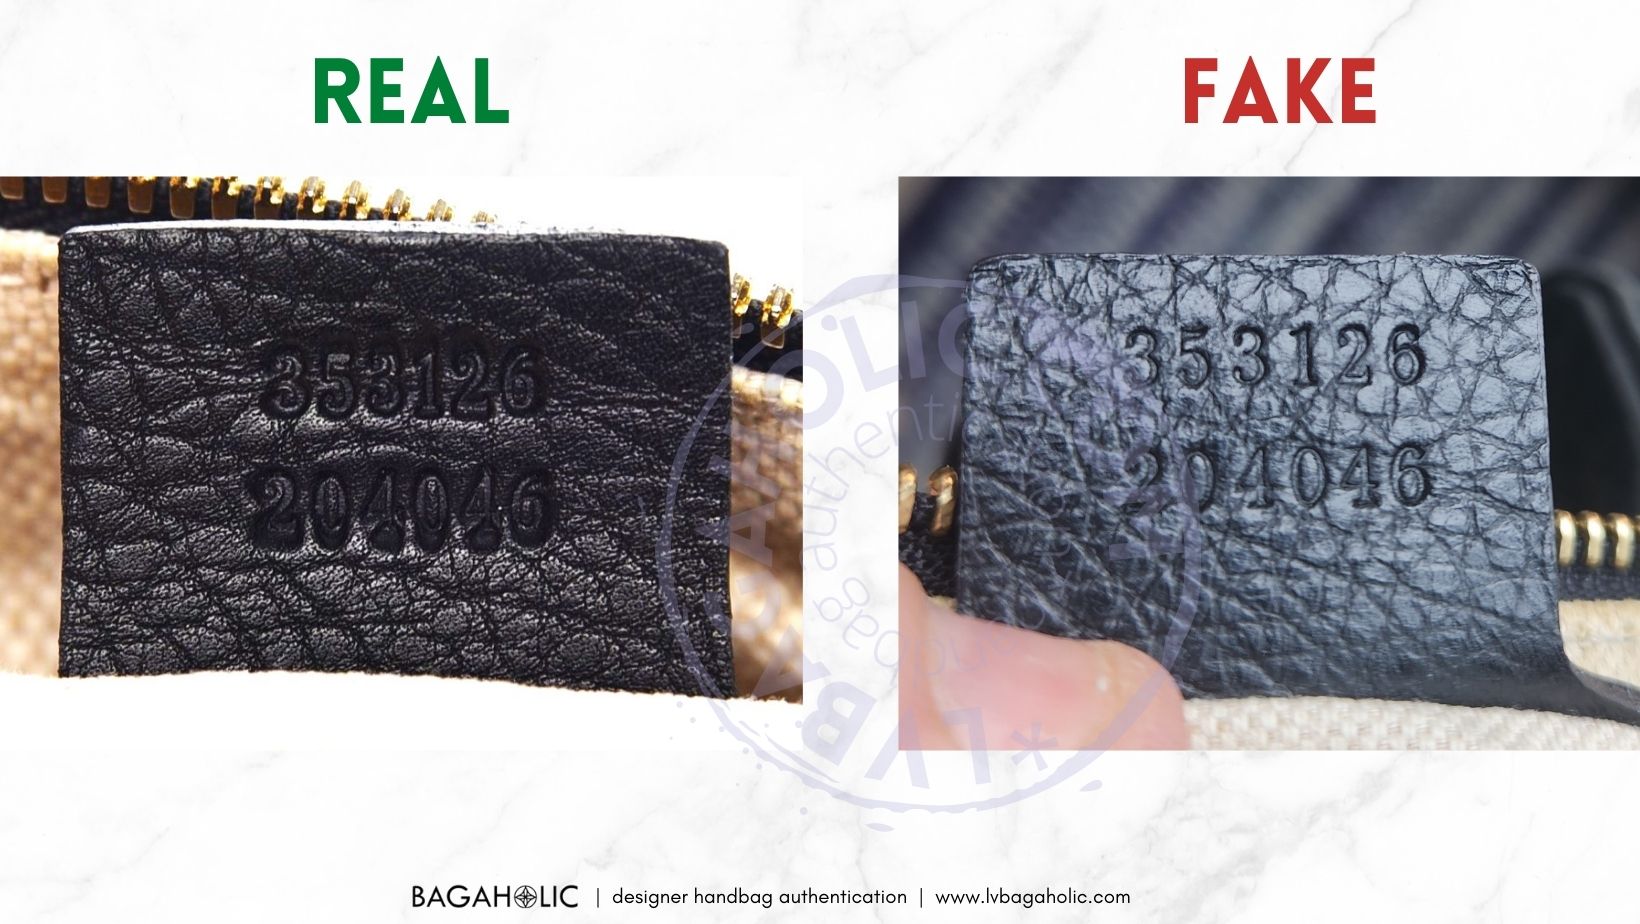 Step By Step Guide on How to spot a fake Gucci bag